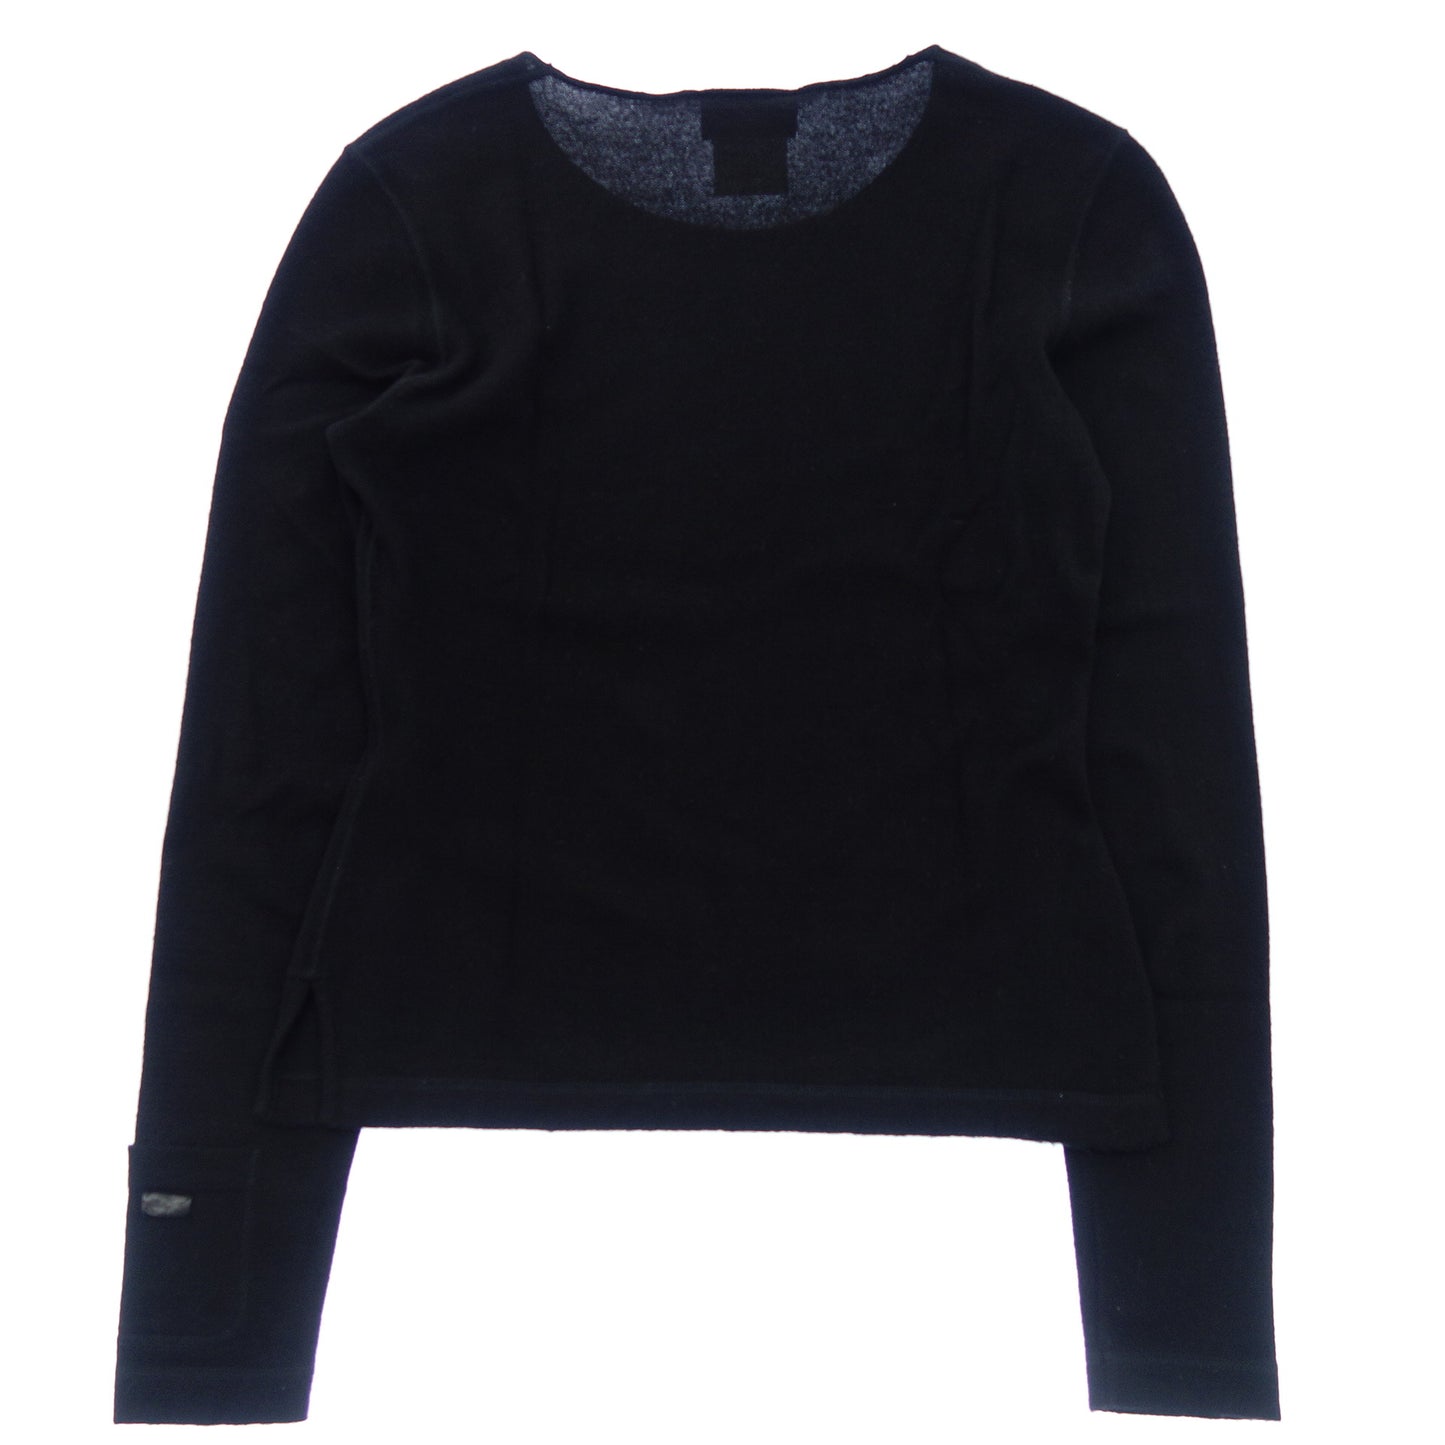 Good Condition◆CHANEL Knit Sweater Cashmere 100 00A Size 38 Women's Black CHANEL [AFB5] 